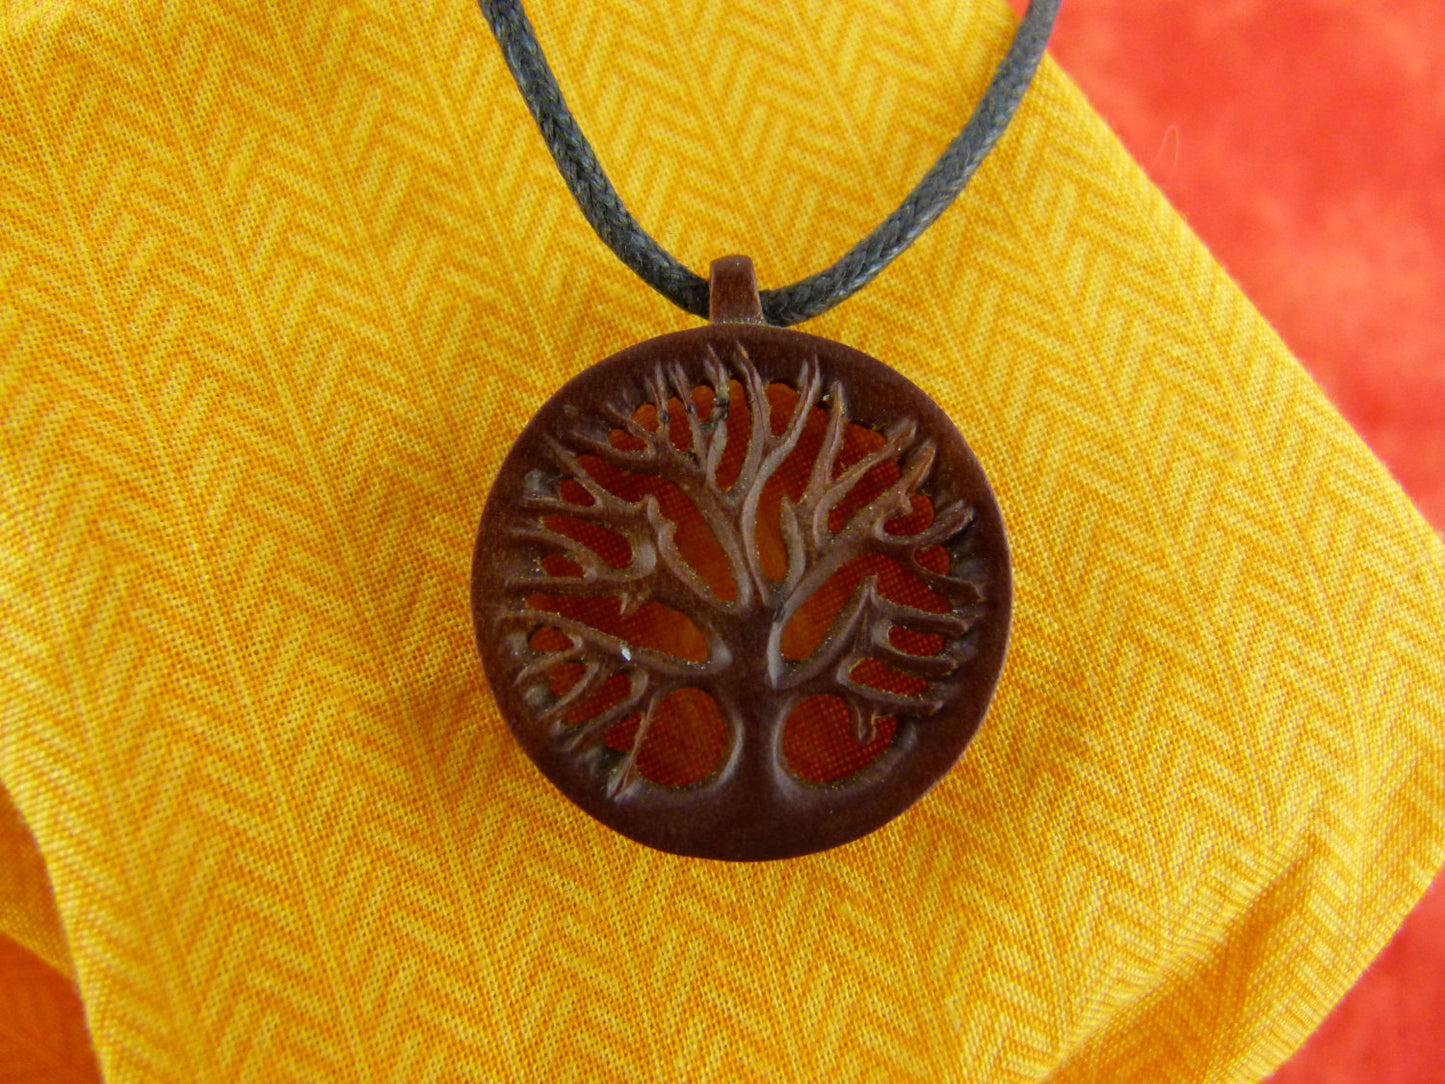 Hand Carved Yoga Tree Of Life Necklace - Z019